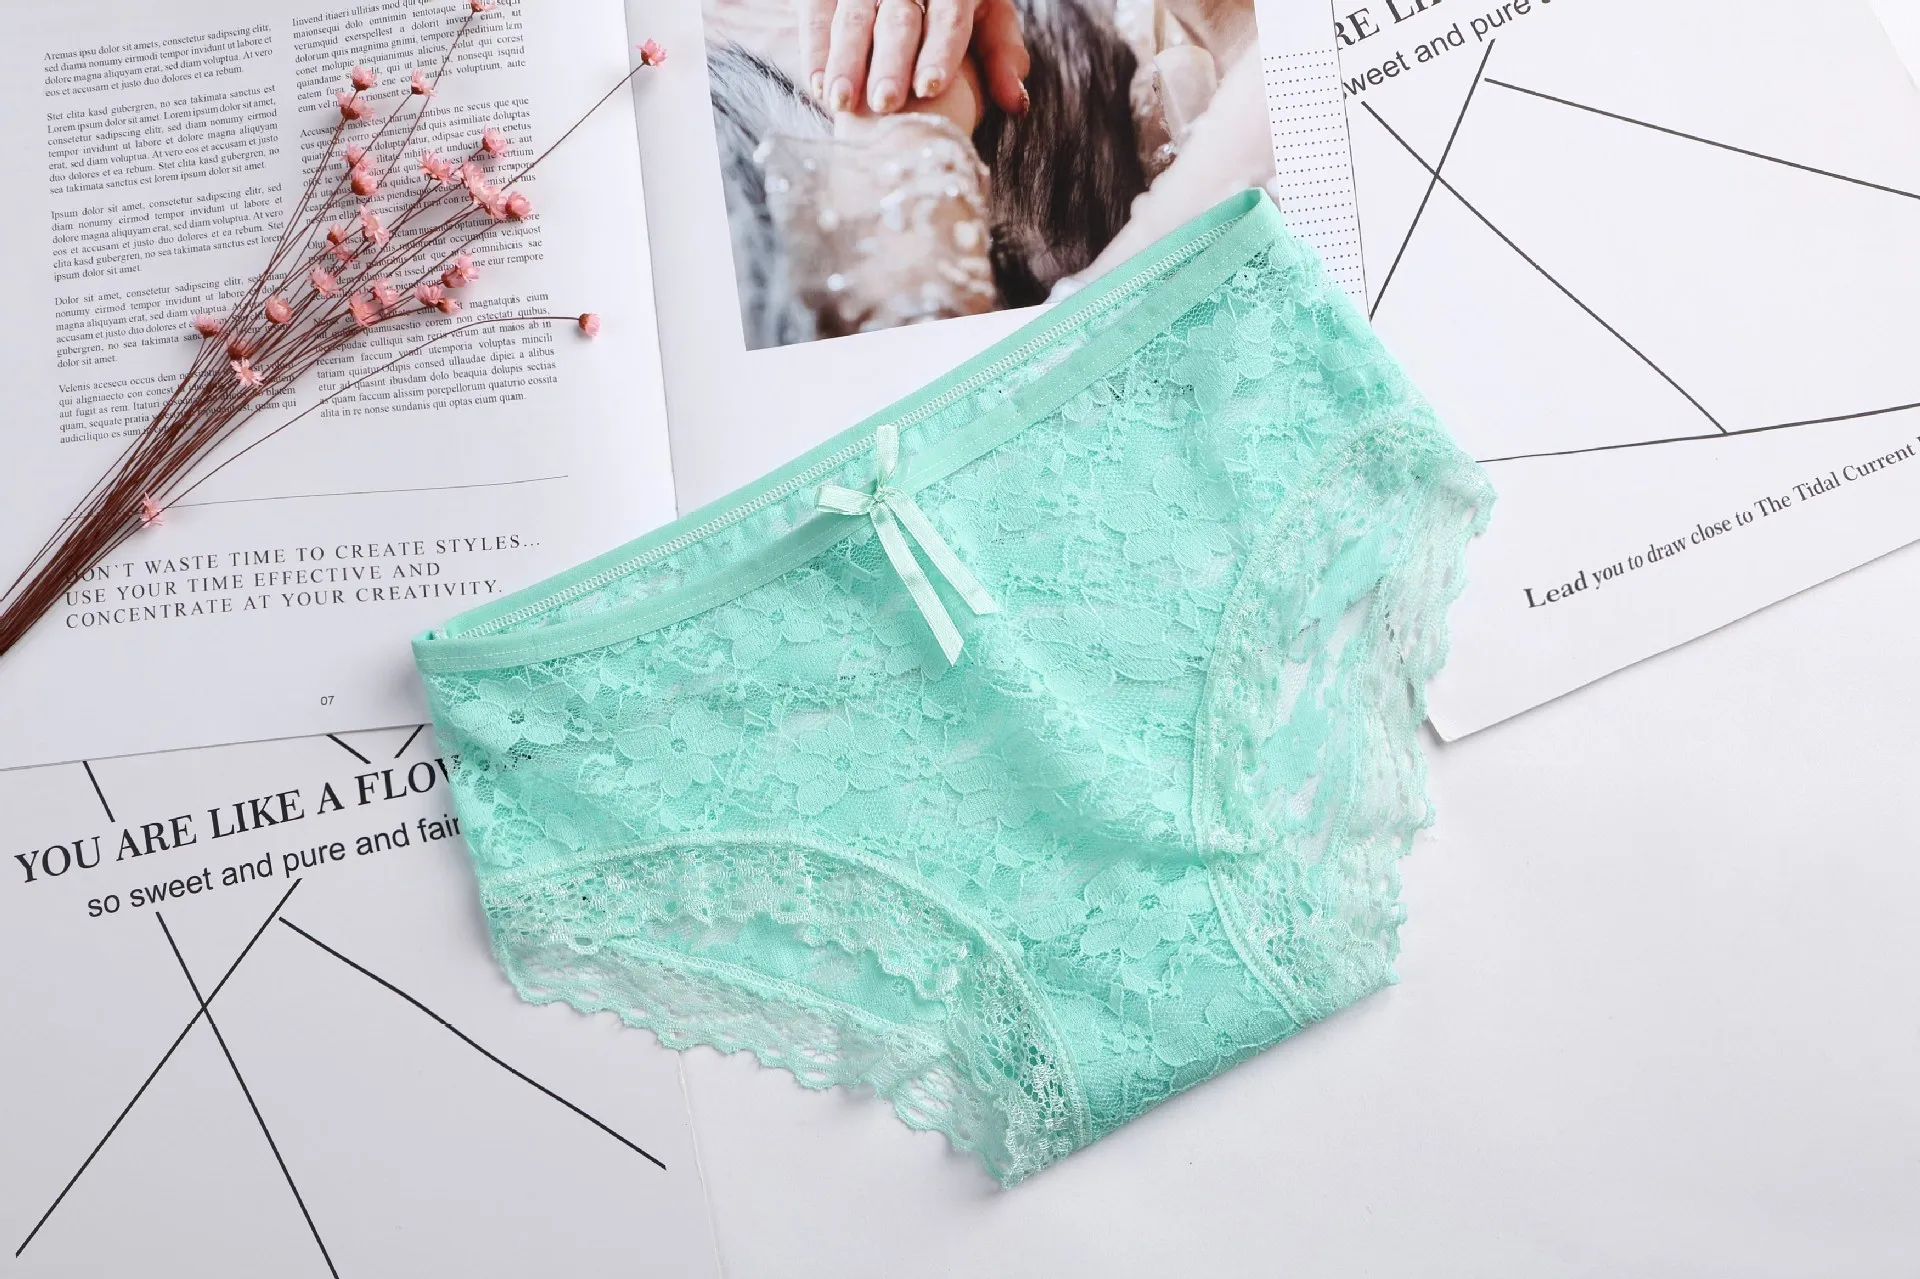 Briefs for Women Lace Cotton Sexy Lingerie Panties Girls Underwear Solid Color Bow Tie Underpants Ladies Panty Calcinha